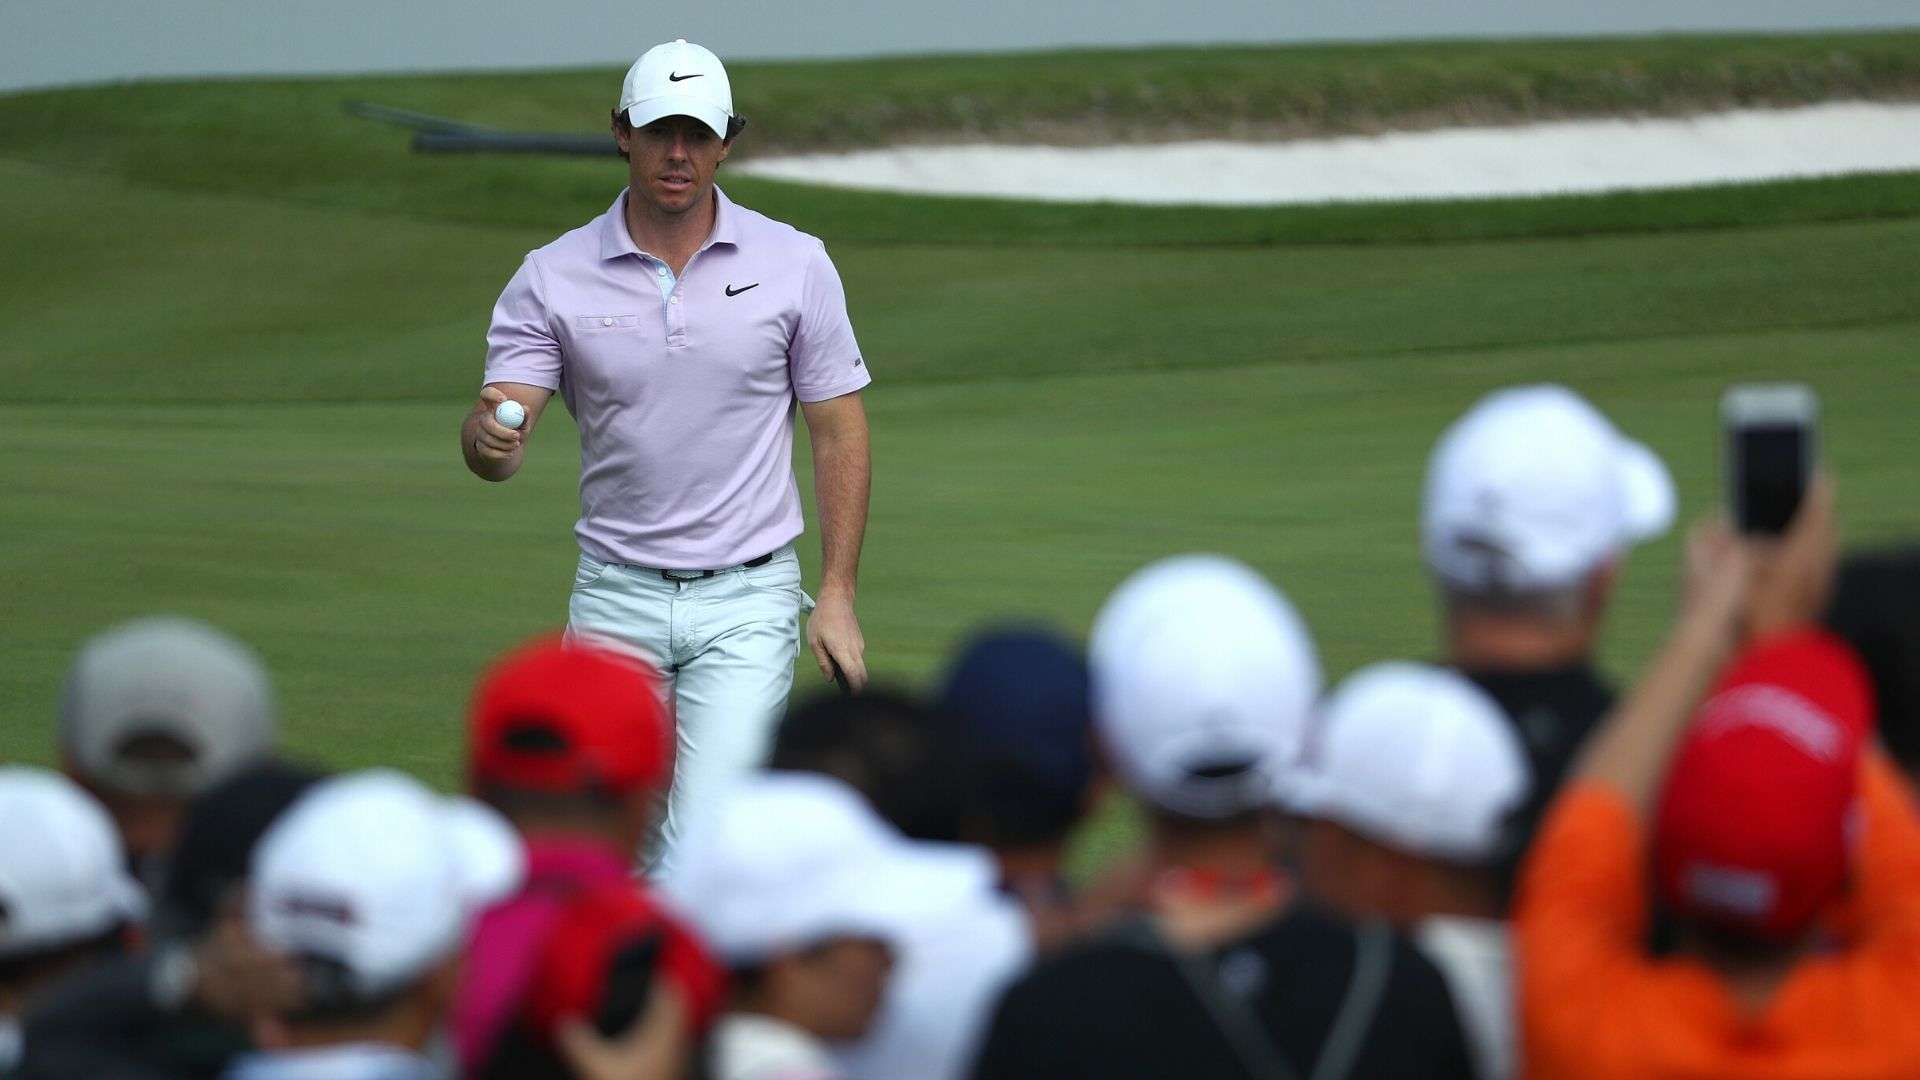 PGA Tour: Rory McIlroy is at 1 at the World Golf Championships-HSBC Champions after the third round